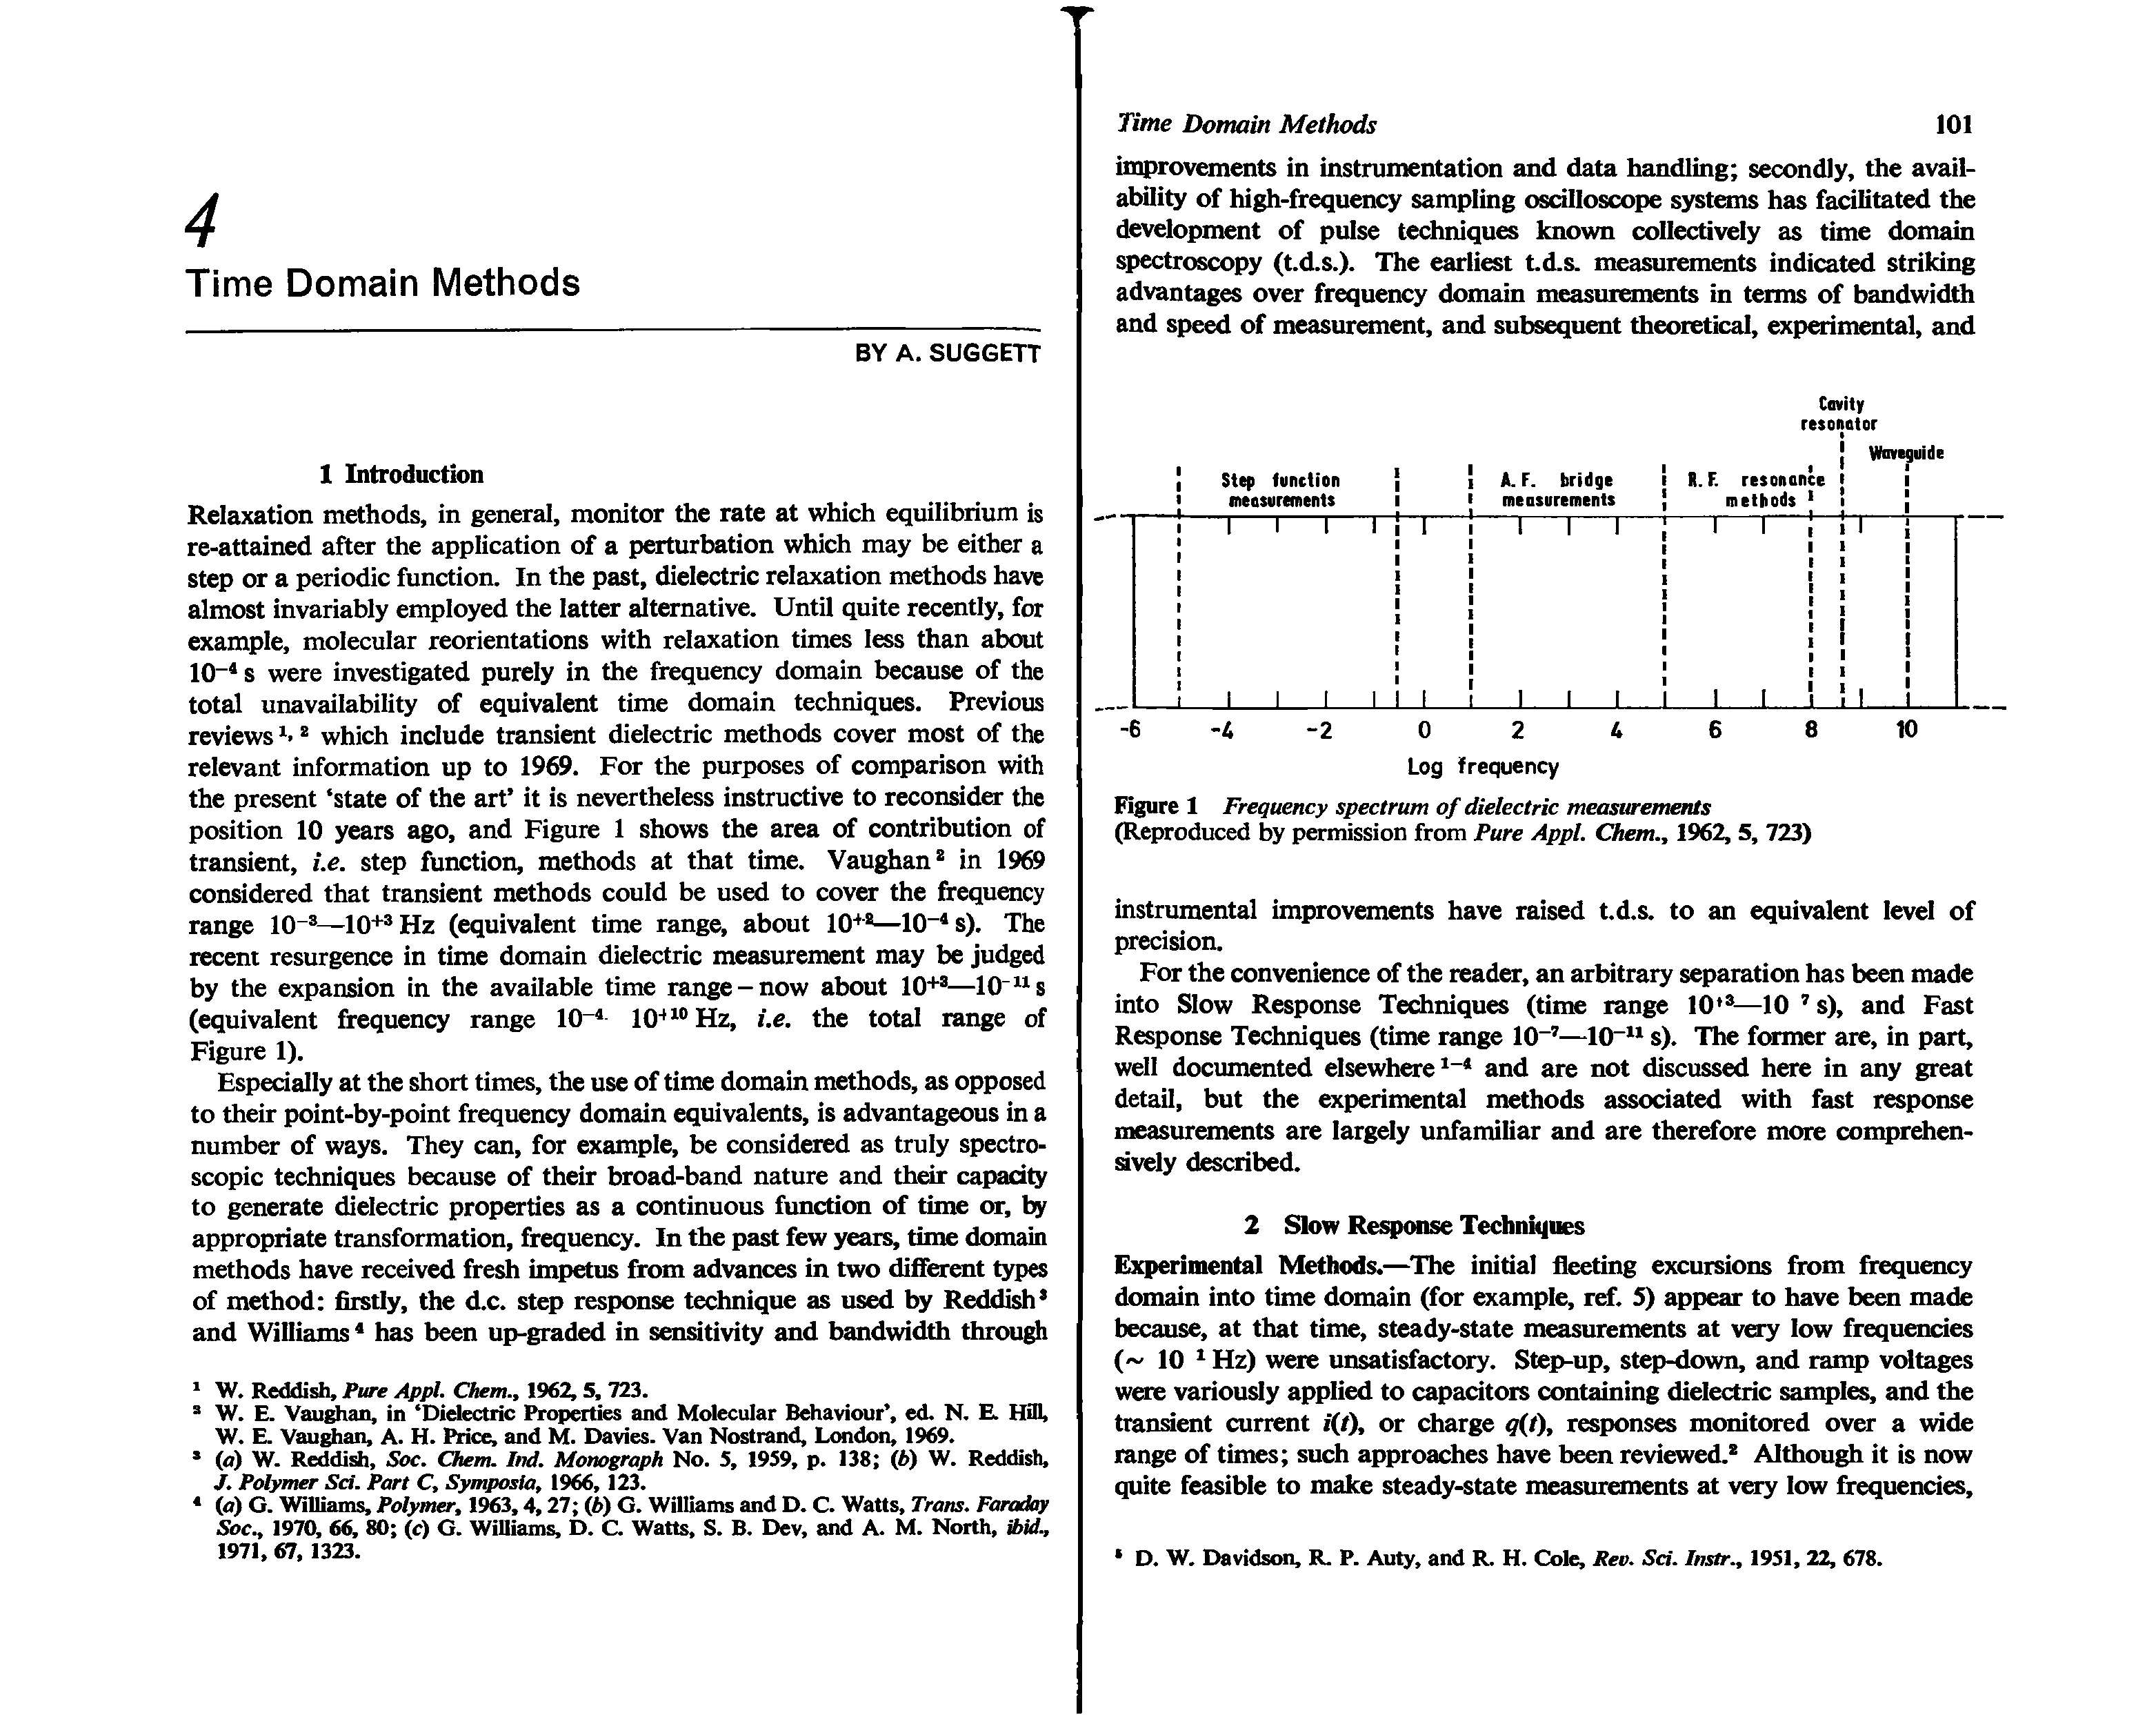 Figure 1 Frequency spectrum of dielectric measurements (Reproduced by permission from Pure Appl. Chem., 1962, 5, 723)...